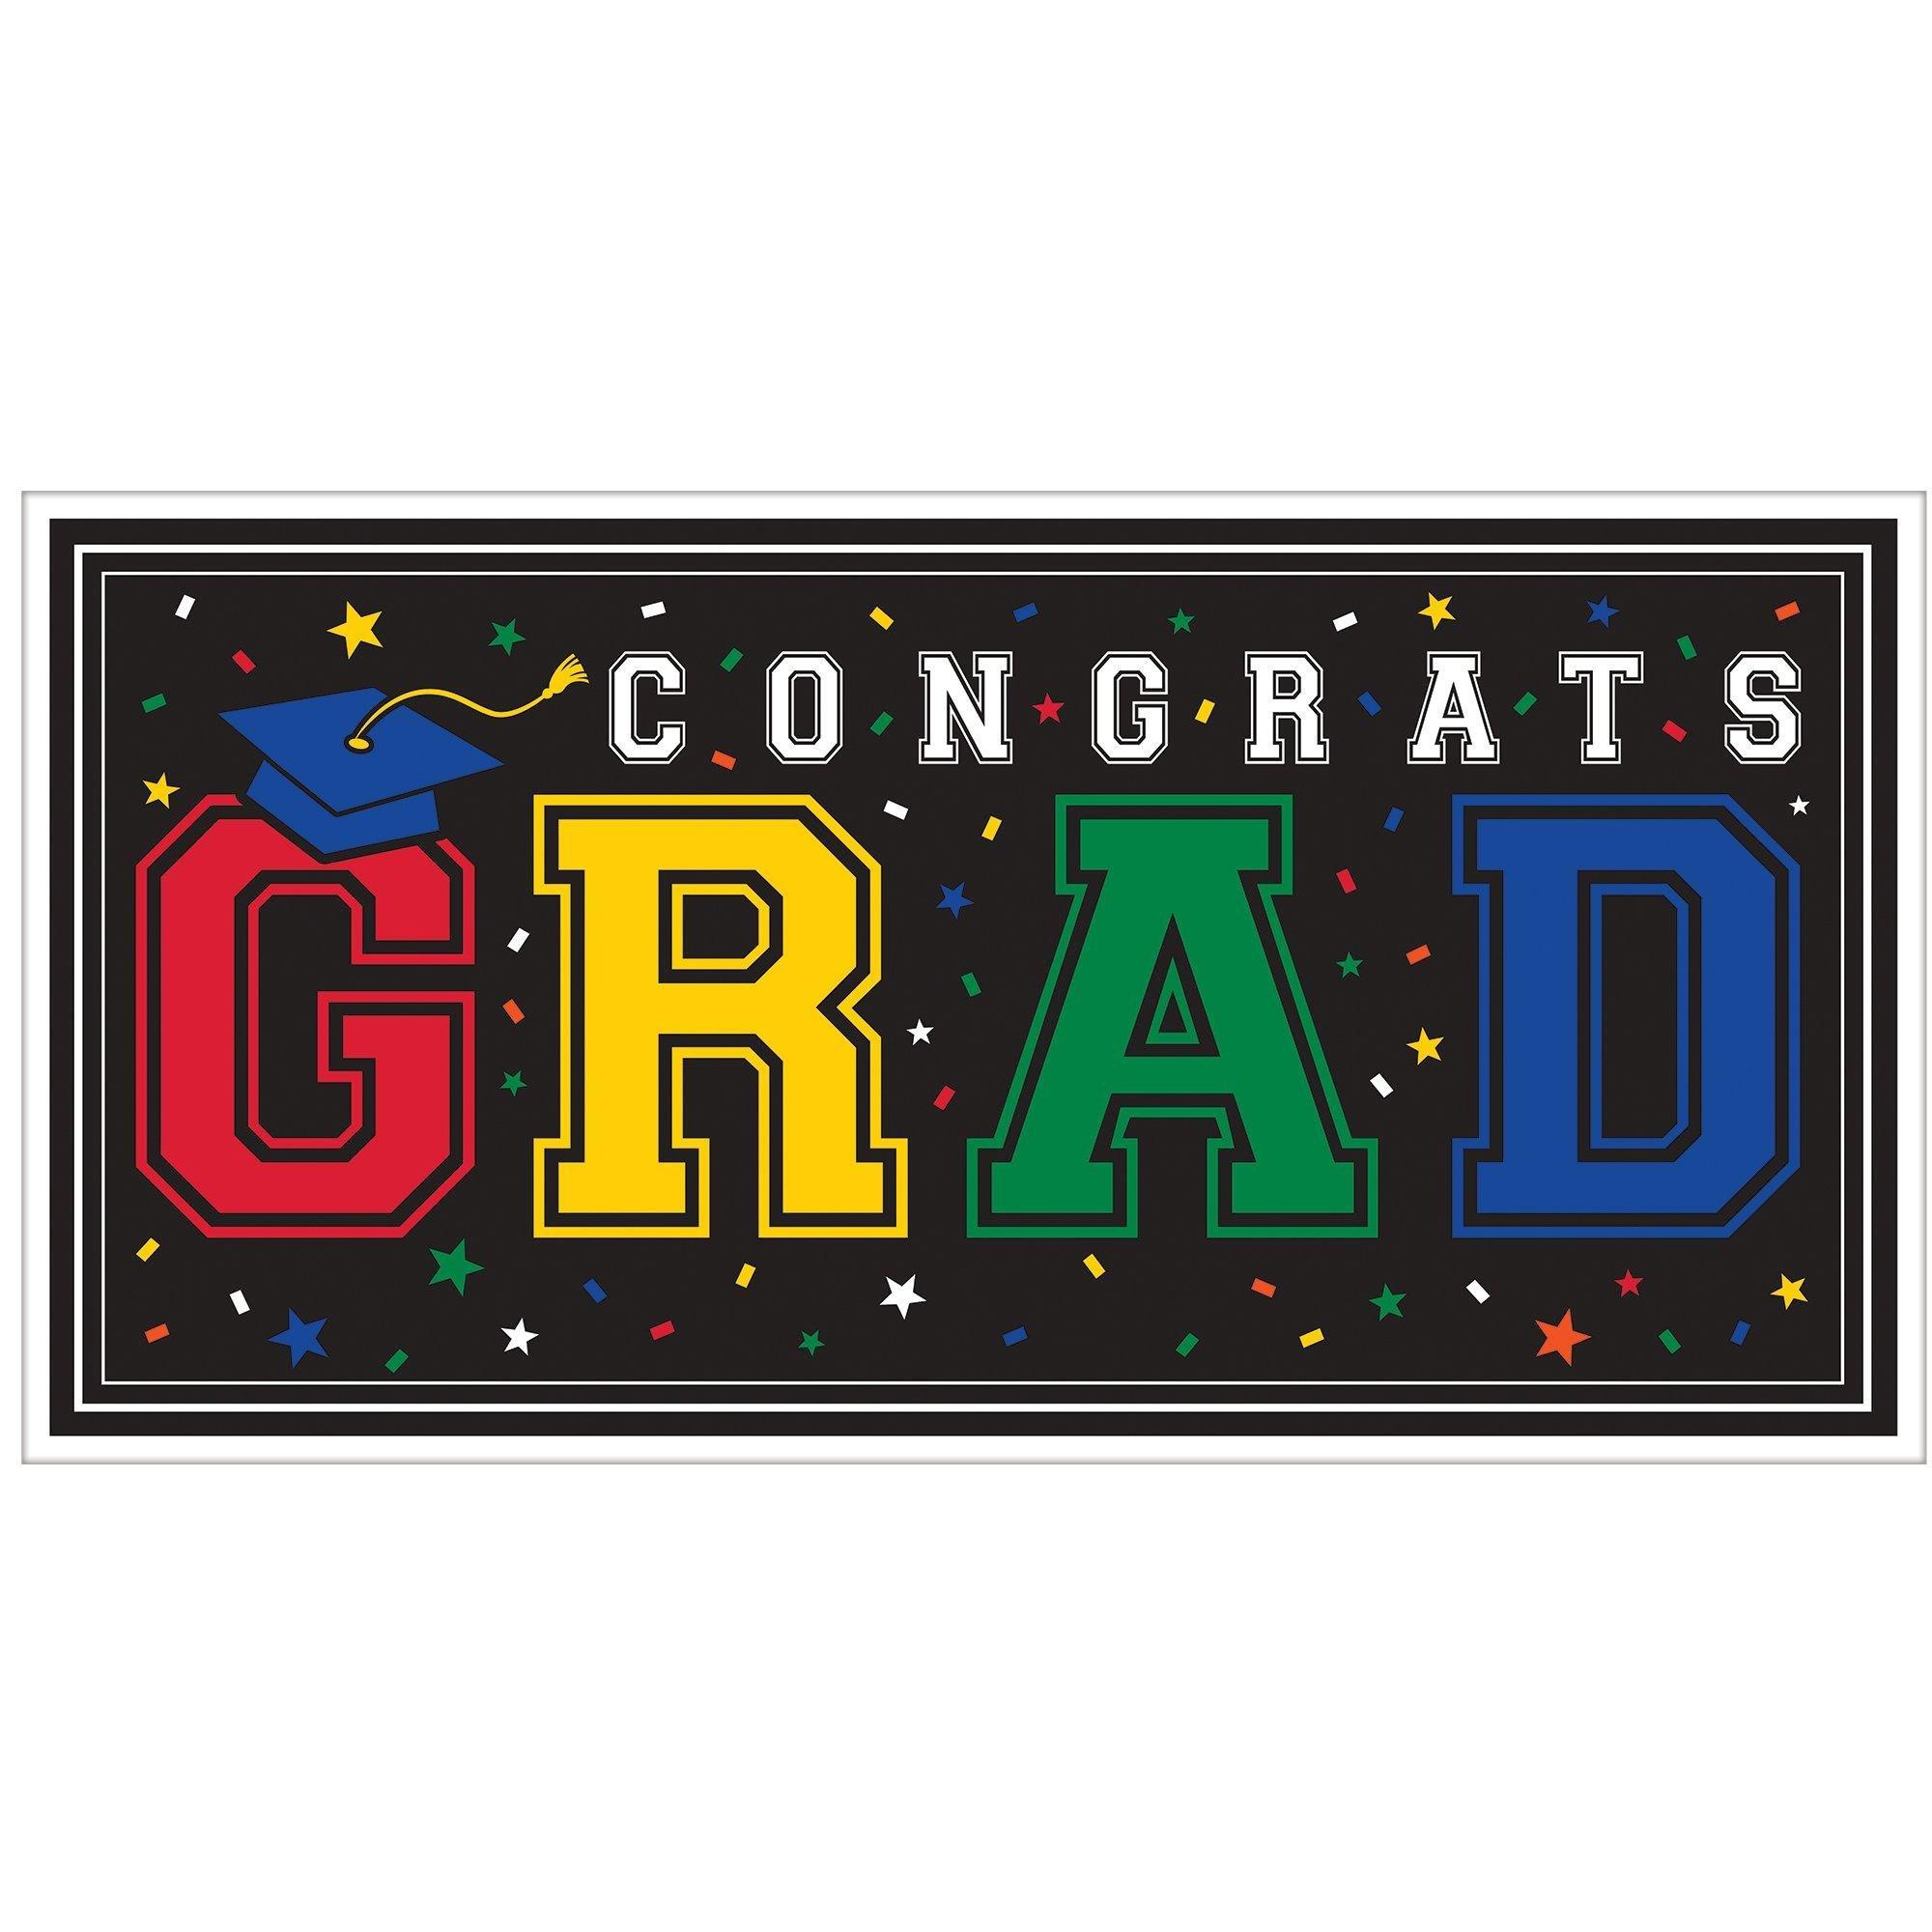 Graduation Party Supplies Kit for 80 with Decorations, Banners, Balloons, Plates, Napkins - White Congrats Grad